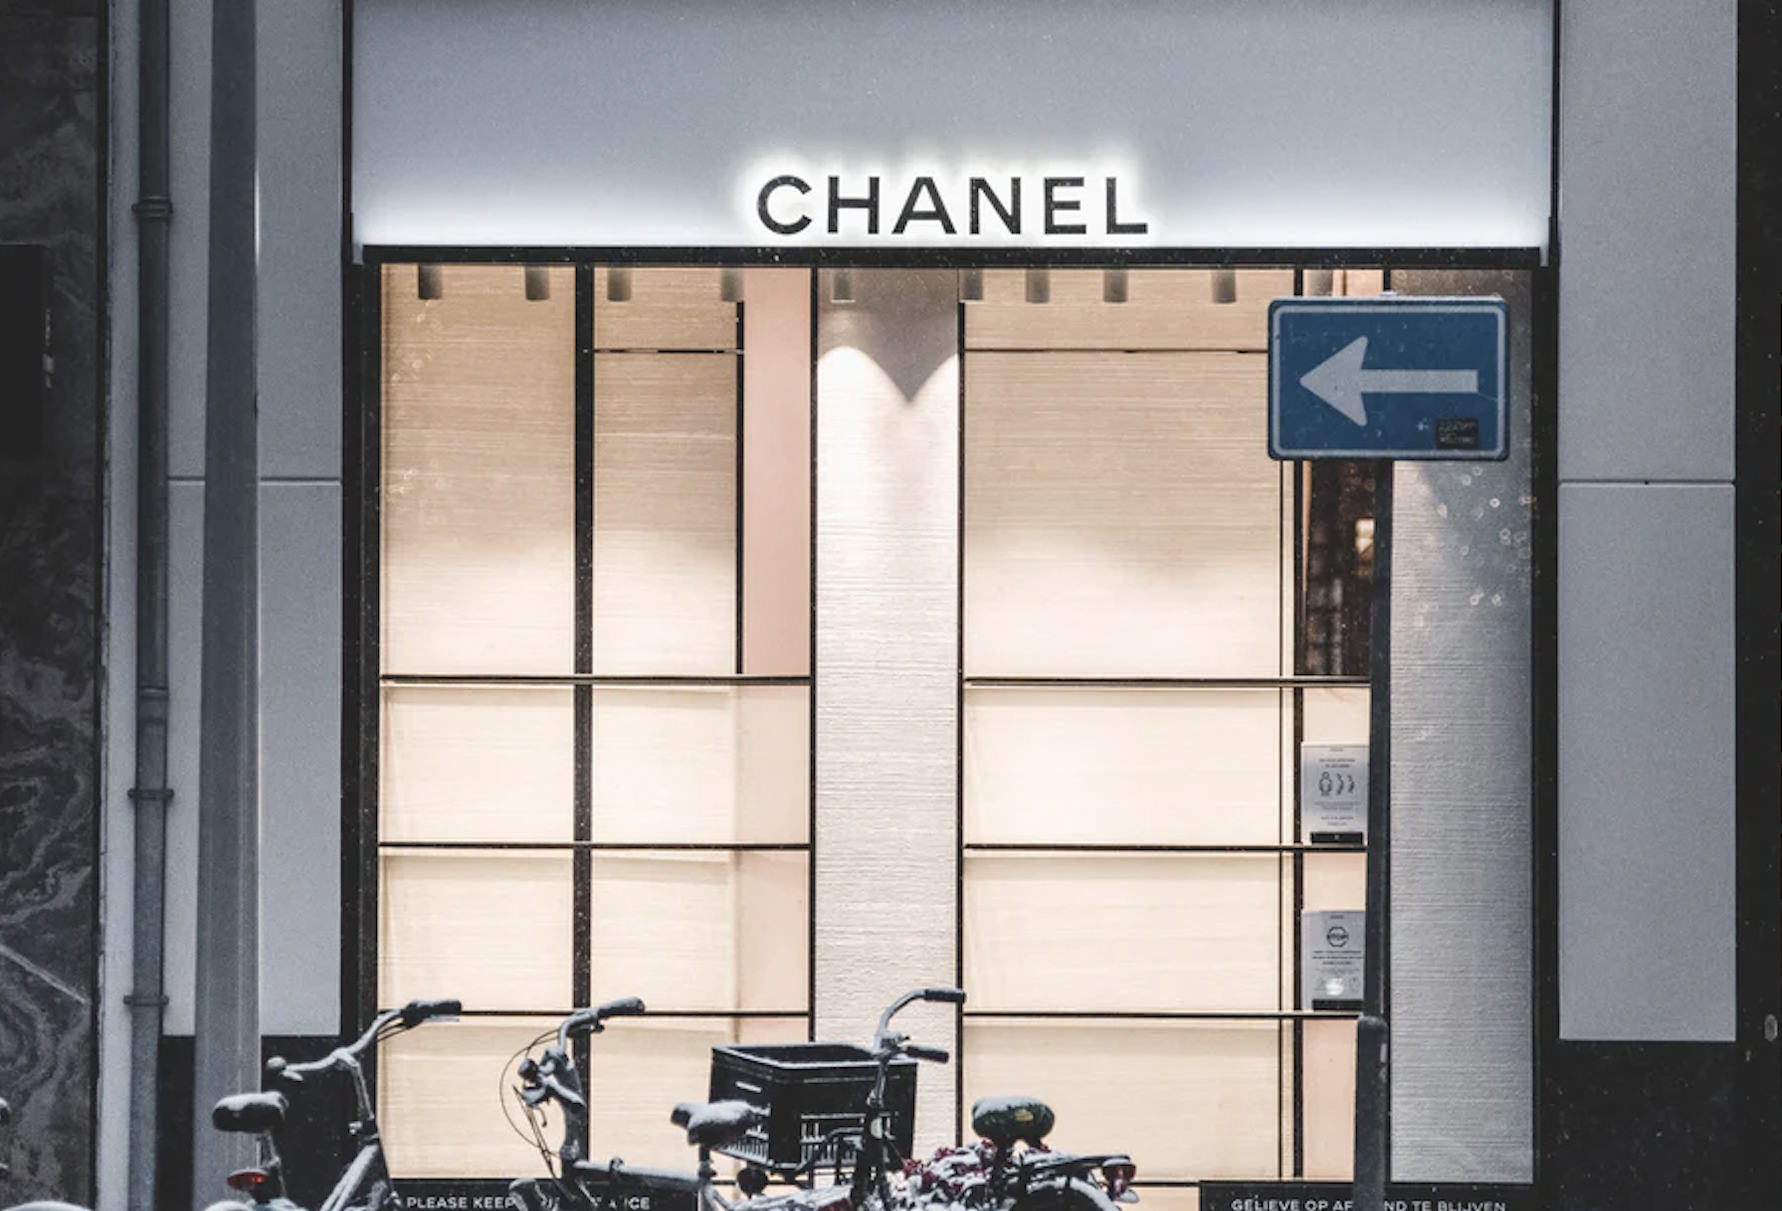 Jewelry Company Sued By Chanel Claims Fashion Brand is Ignoring First Sale  Doctrine Protections - The Fashion Law